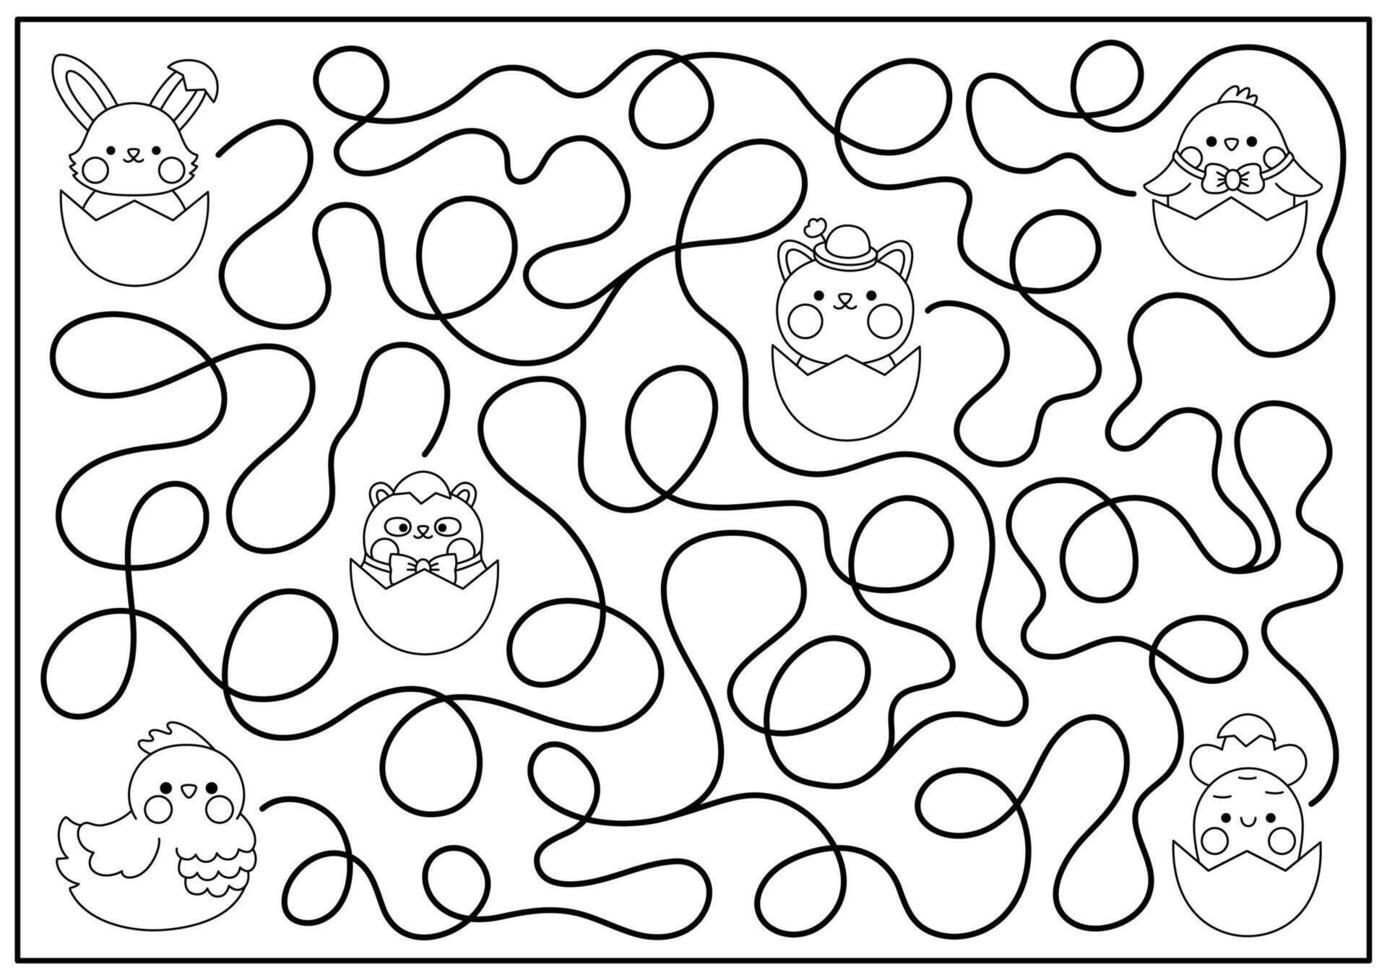 Easter black and white maze for kids. Spring holiday preschool printable activity with kawaii hen searching for chick. Garden labyrinth game, puzzle or coloring page with cute character vector